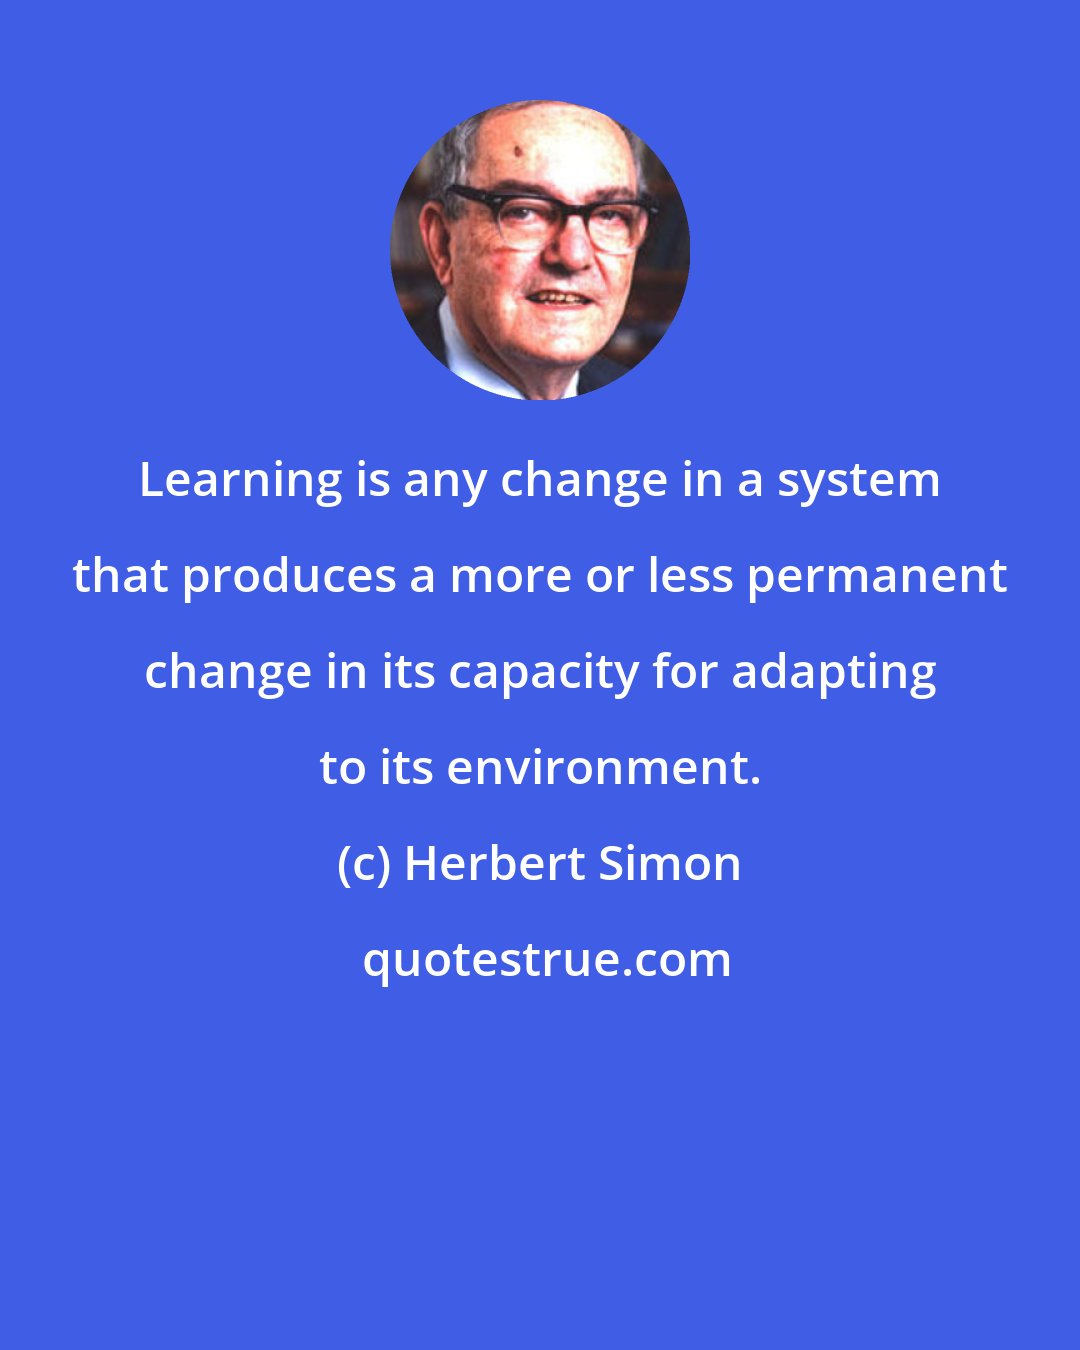 Herbert Simon: Learning is any change in a system that produces a more or less permanent change in its capacity for adapting to its environment.